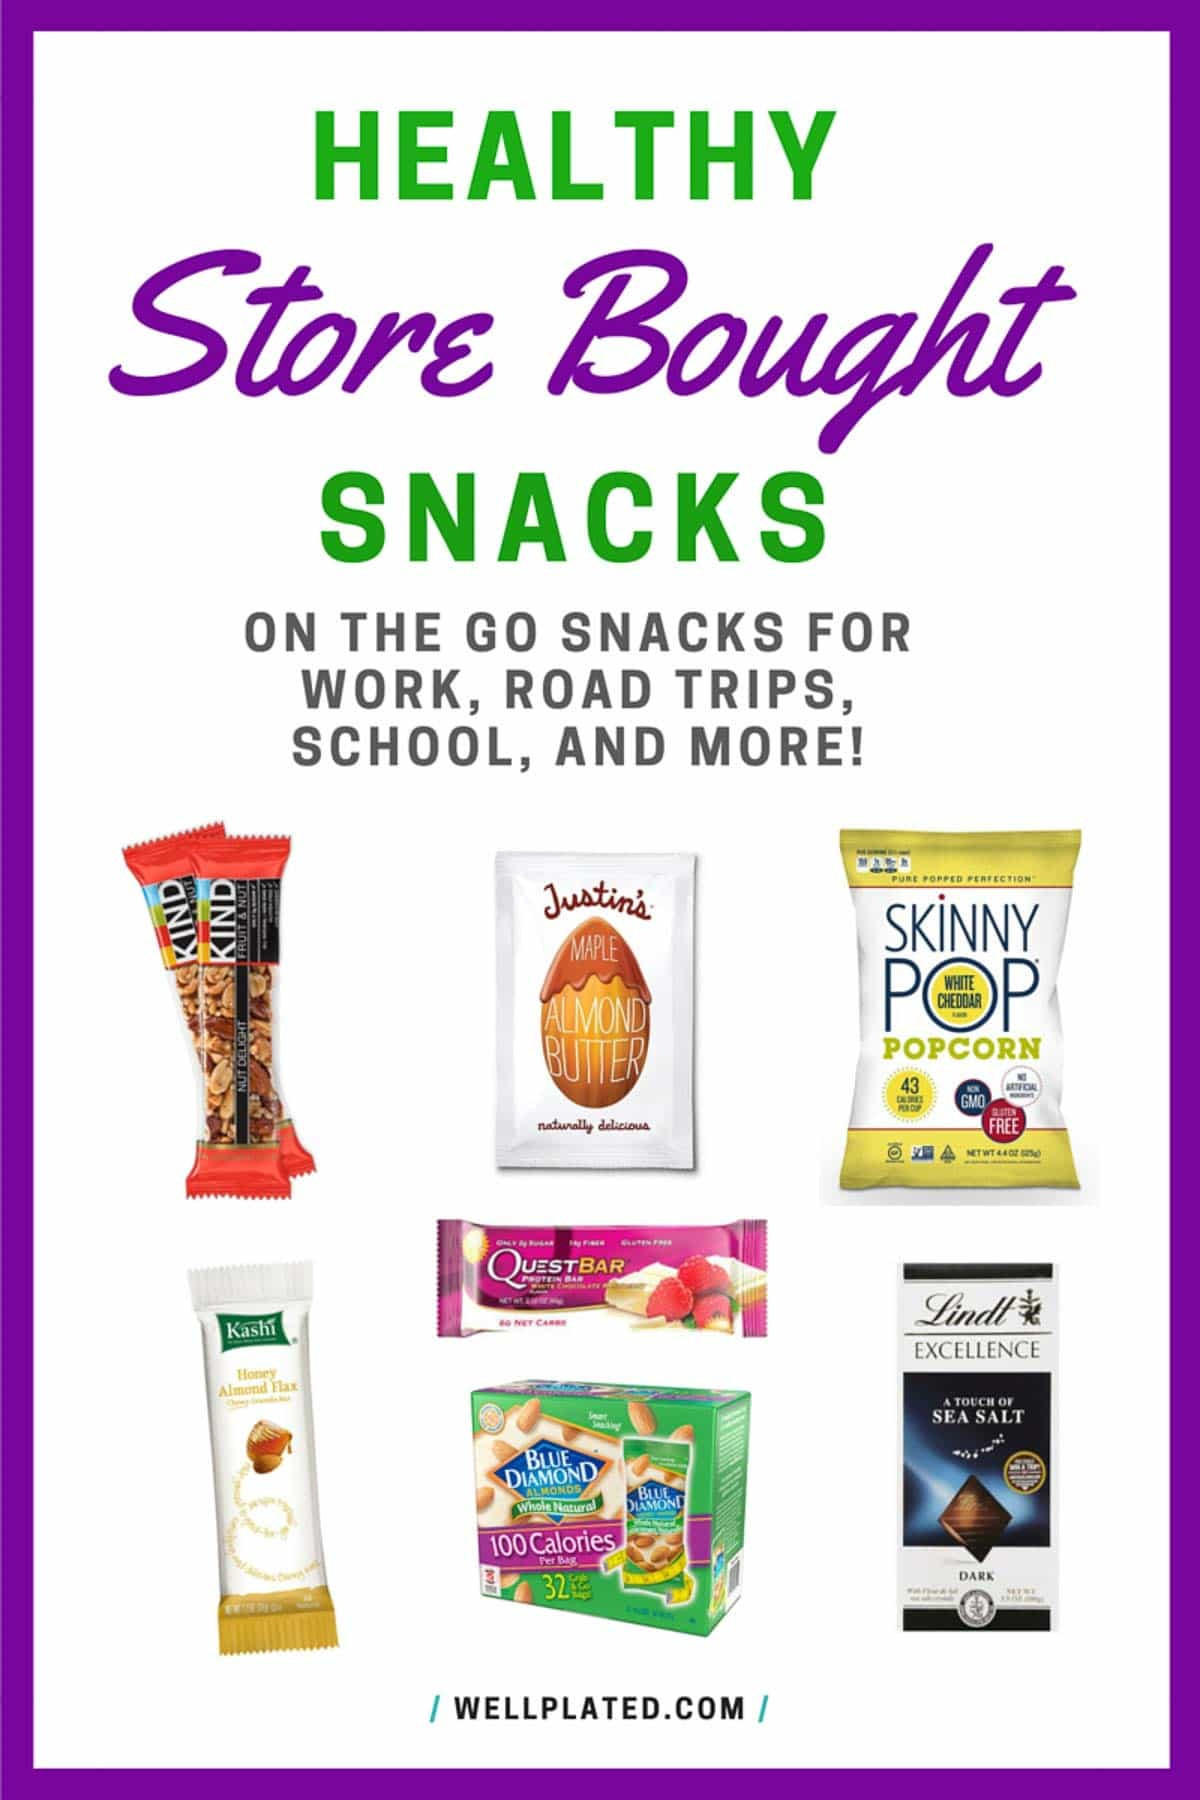 Healthy Snacks To Buy From The Supermarket
 The Best Healthy Store Bought Snacks